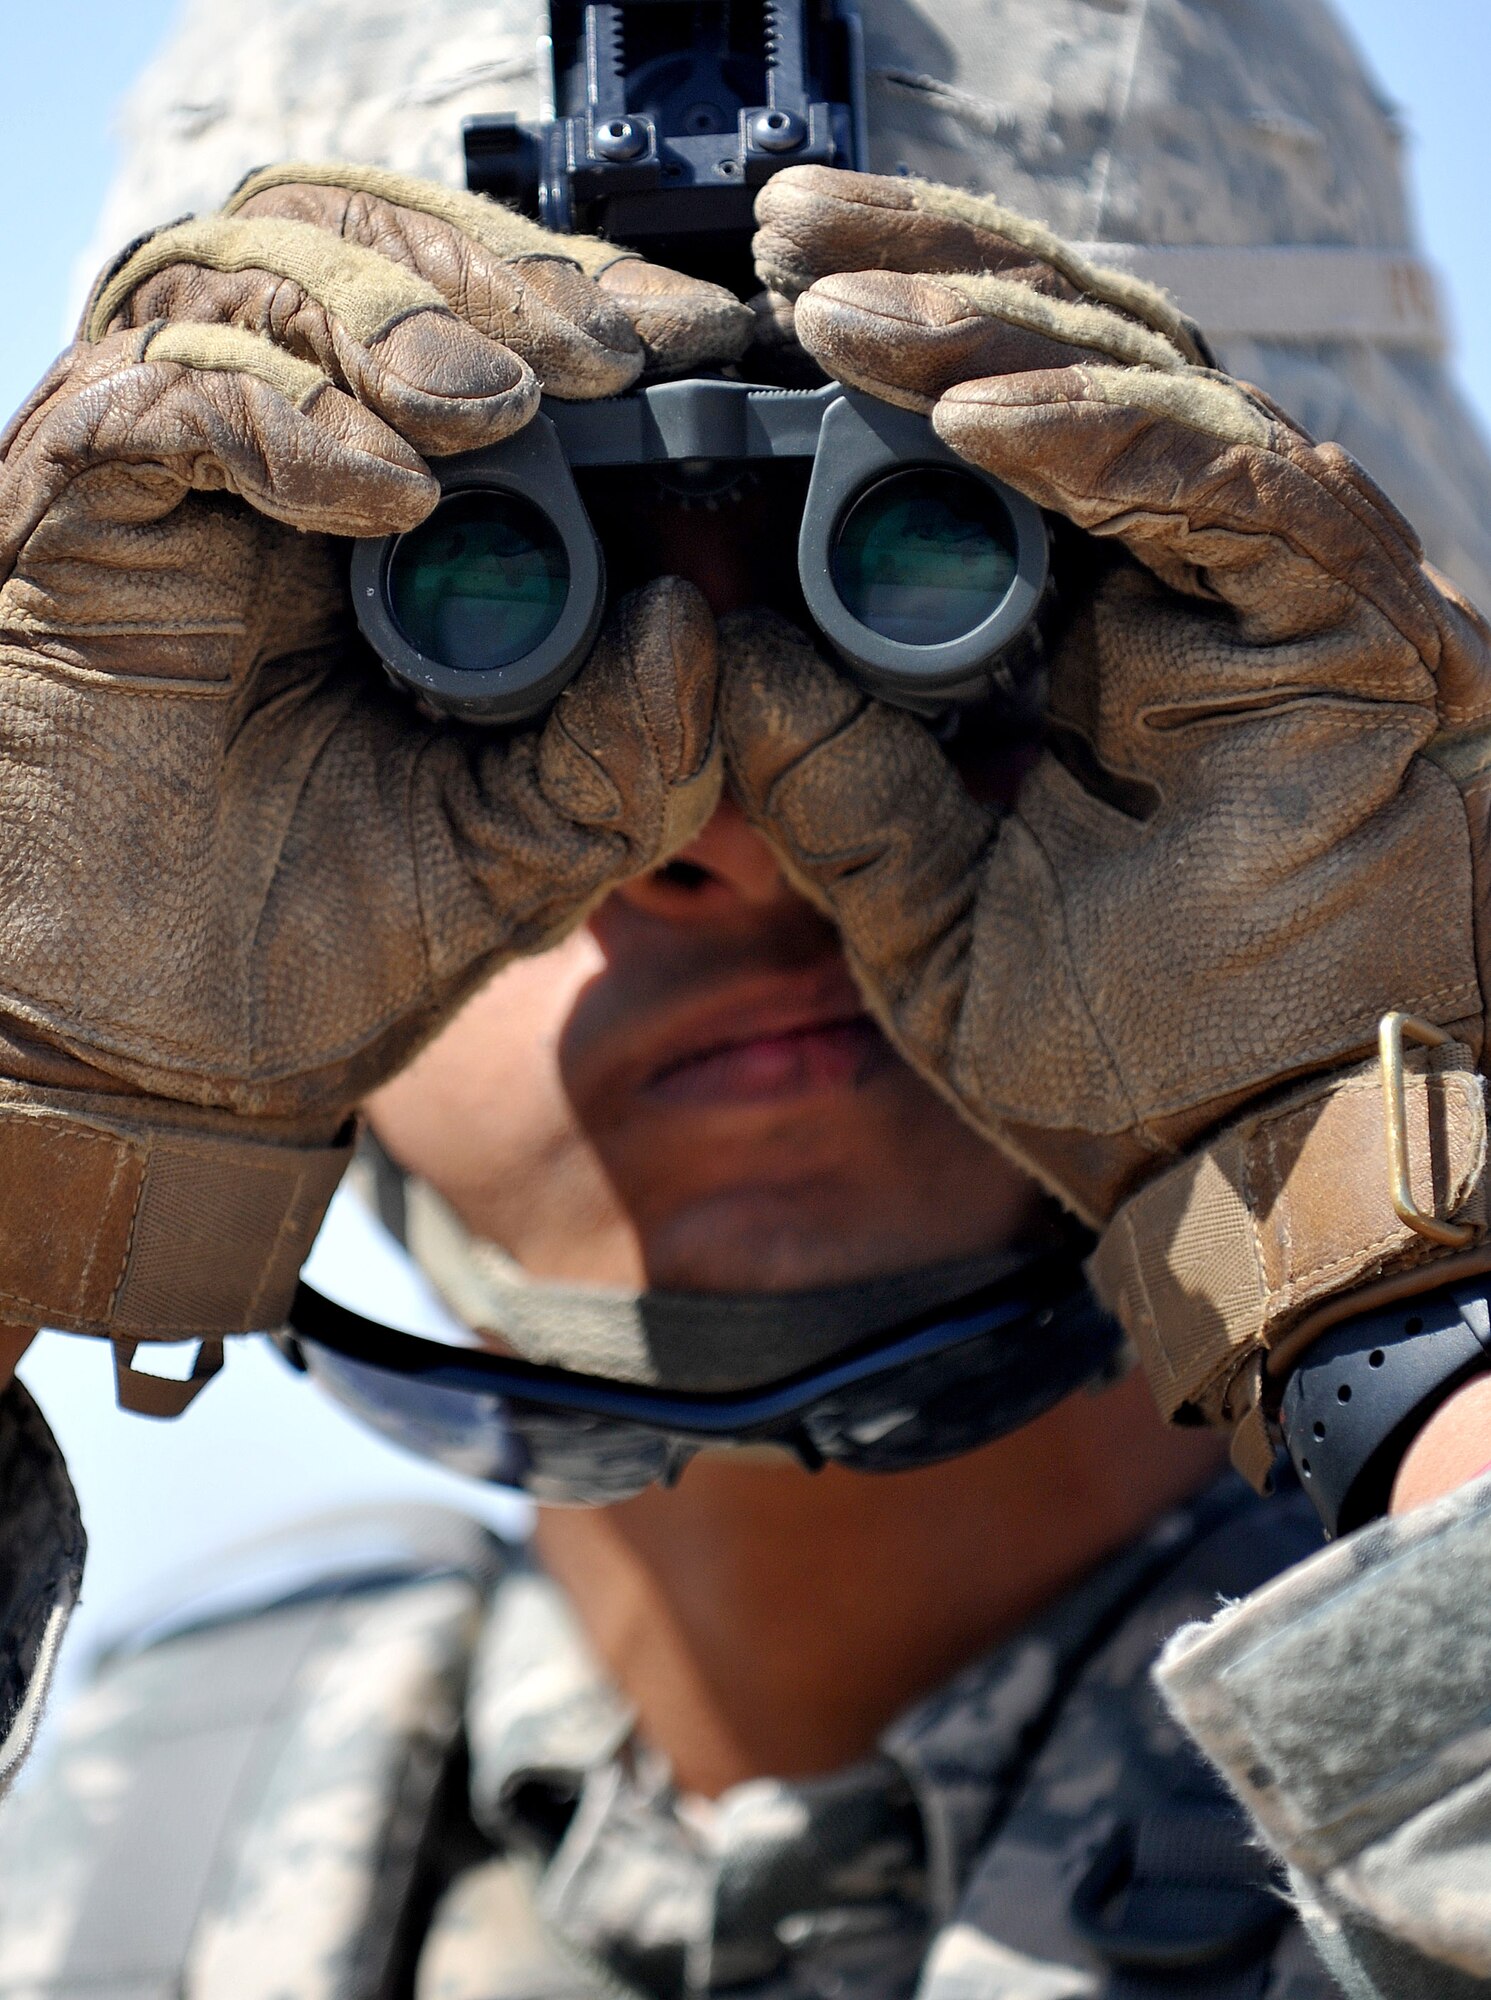 Senior Airman Jesse Mercado, 407th Expeditionary Operations Support Squadron explosive ordnance disposal technician, looks through a pair of binoculars during a training exercise March 3, 2010, at Ali Air Base, Iraq. (U.S. Air Force photo by Senior Airman Andrew Lee/Released)